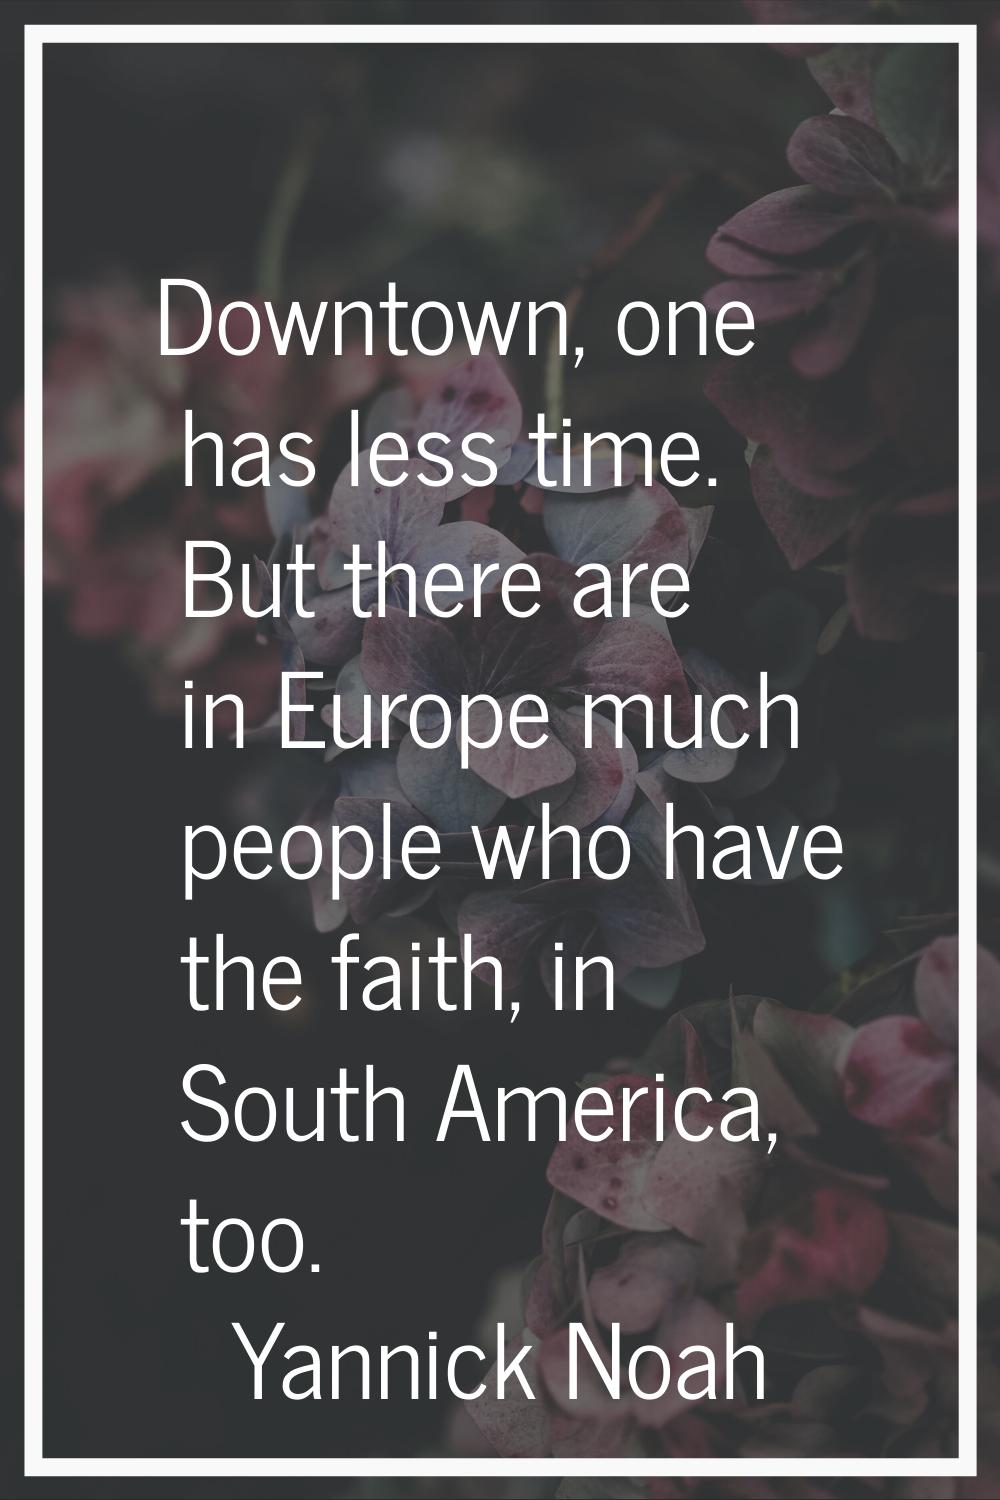 Downtown, one has less time. But there are in Europe much people who have the faith, in South Ameri